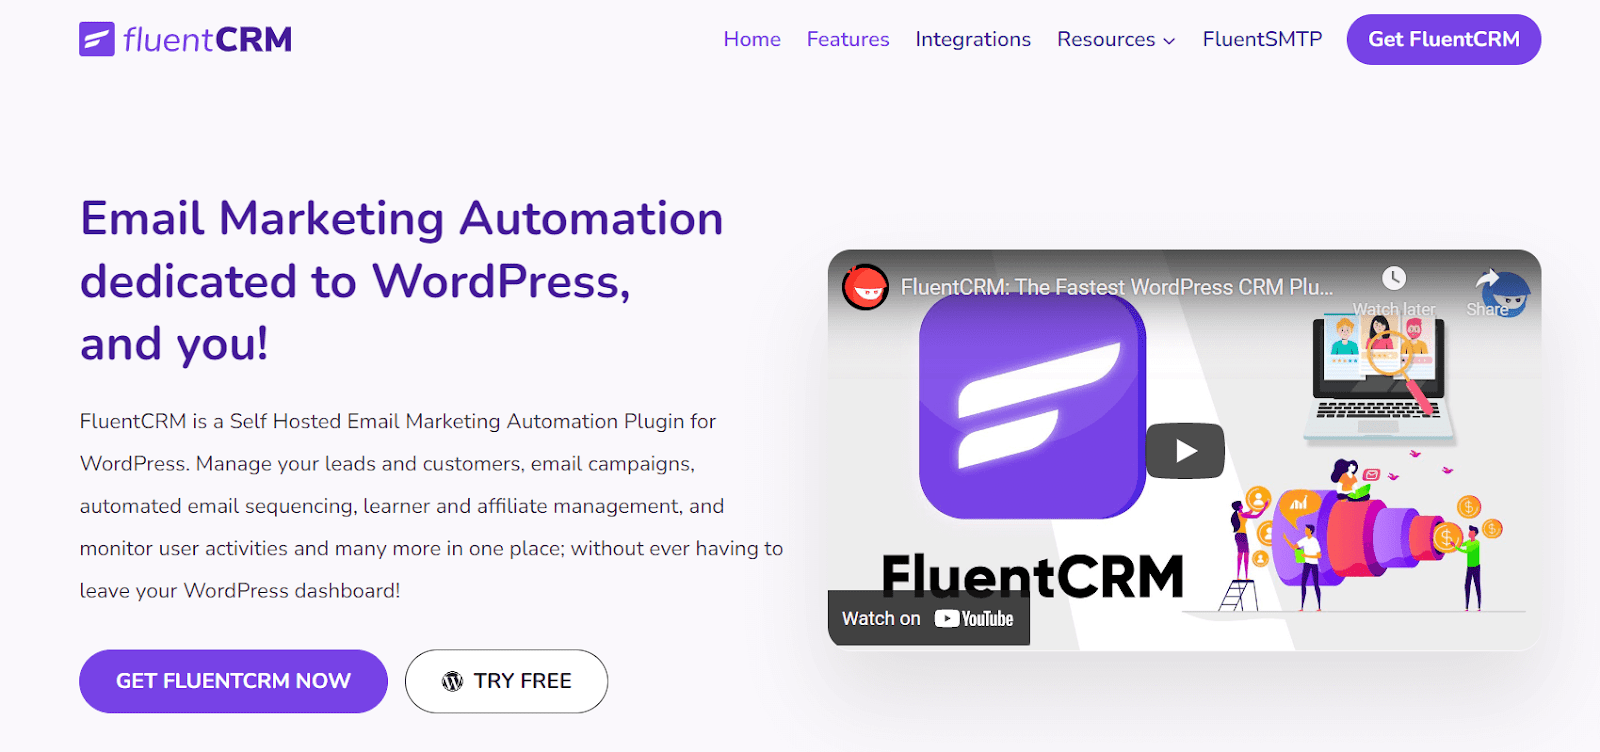 FluentCRM website home page, one of the best CRM plugins for WordPress